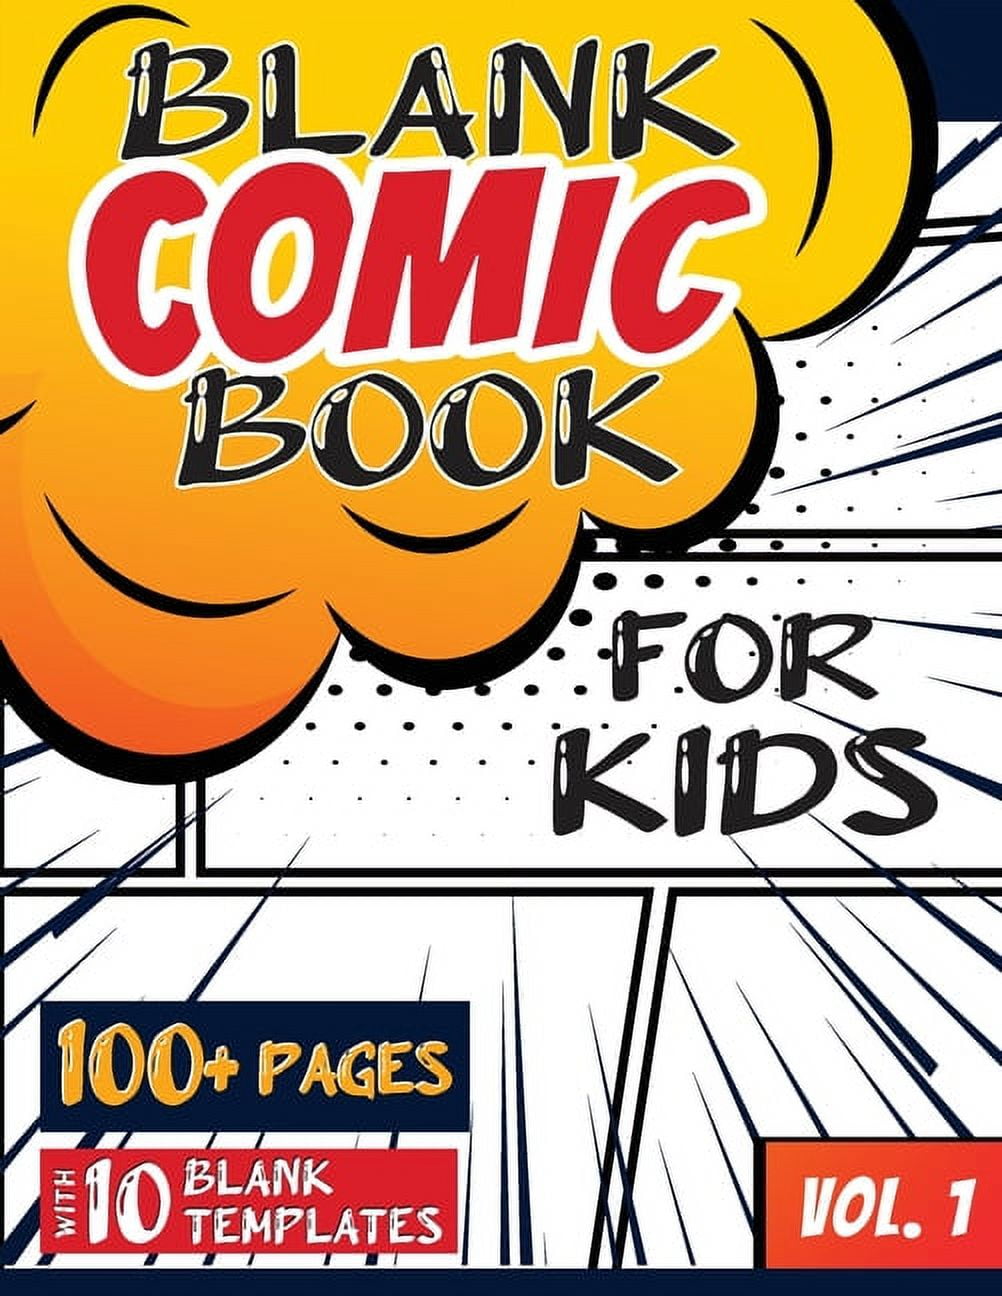 Empty Comic Book For Drawing: Create Your Own Comic Book Kit